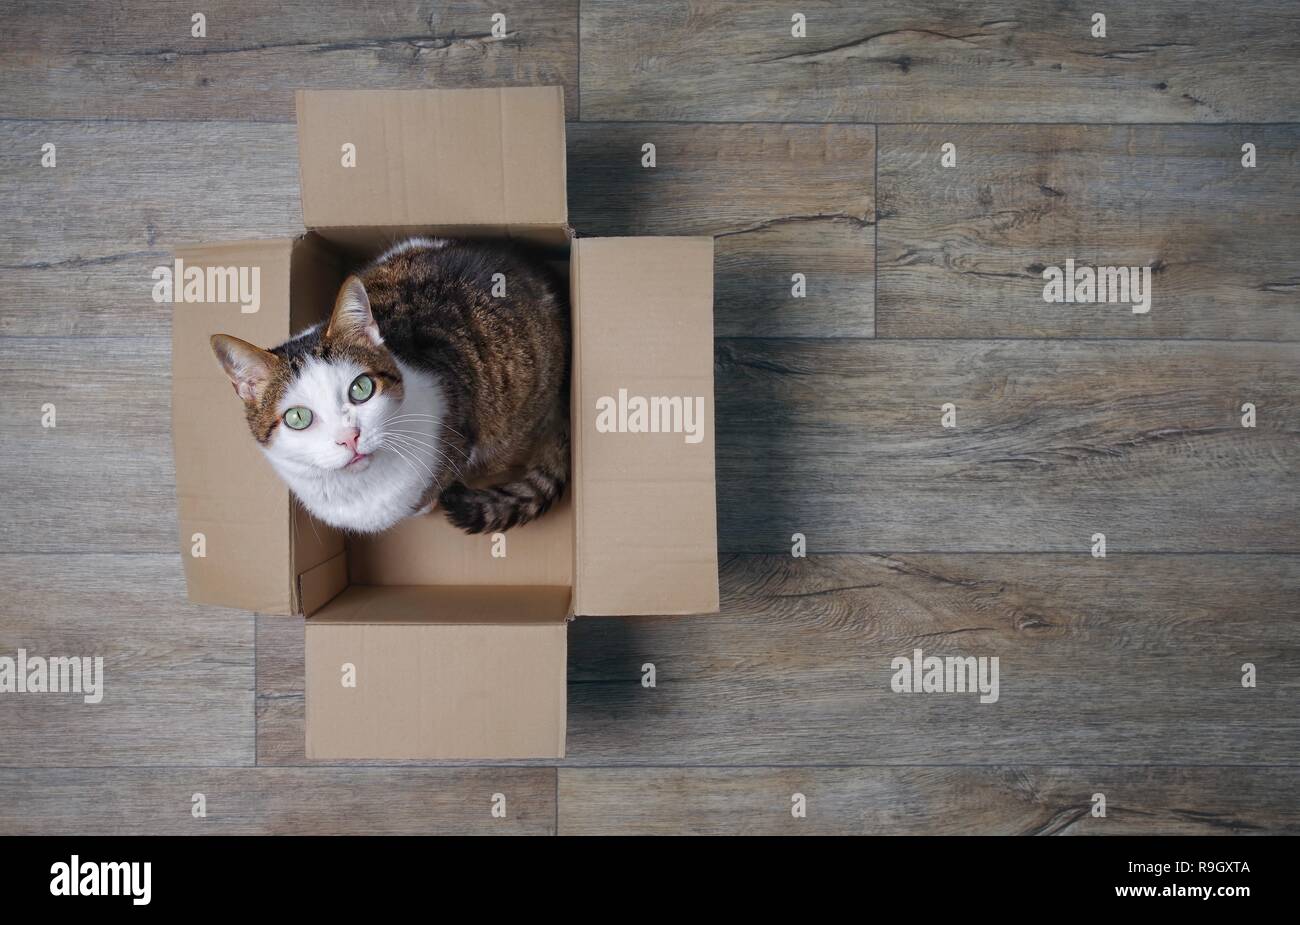 Tabby cat in a cardboard box looking curious up to the camera. High angle view with copy space. Stock Photo